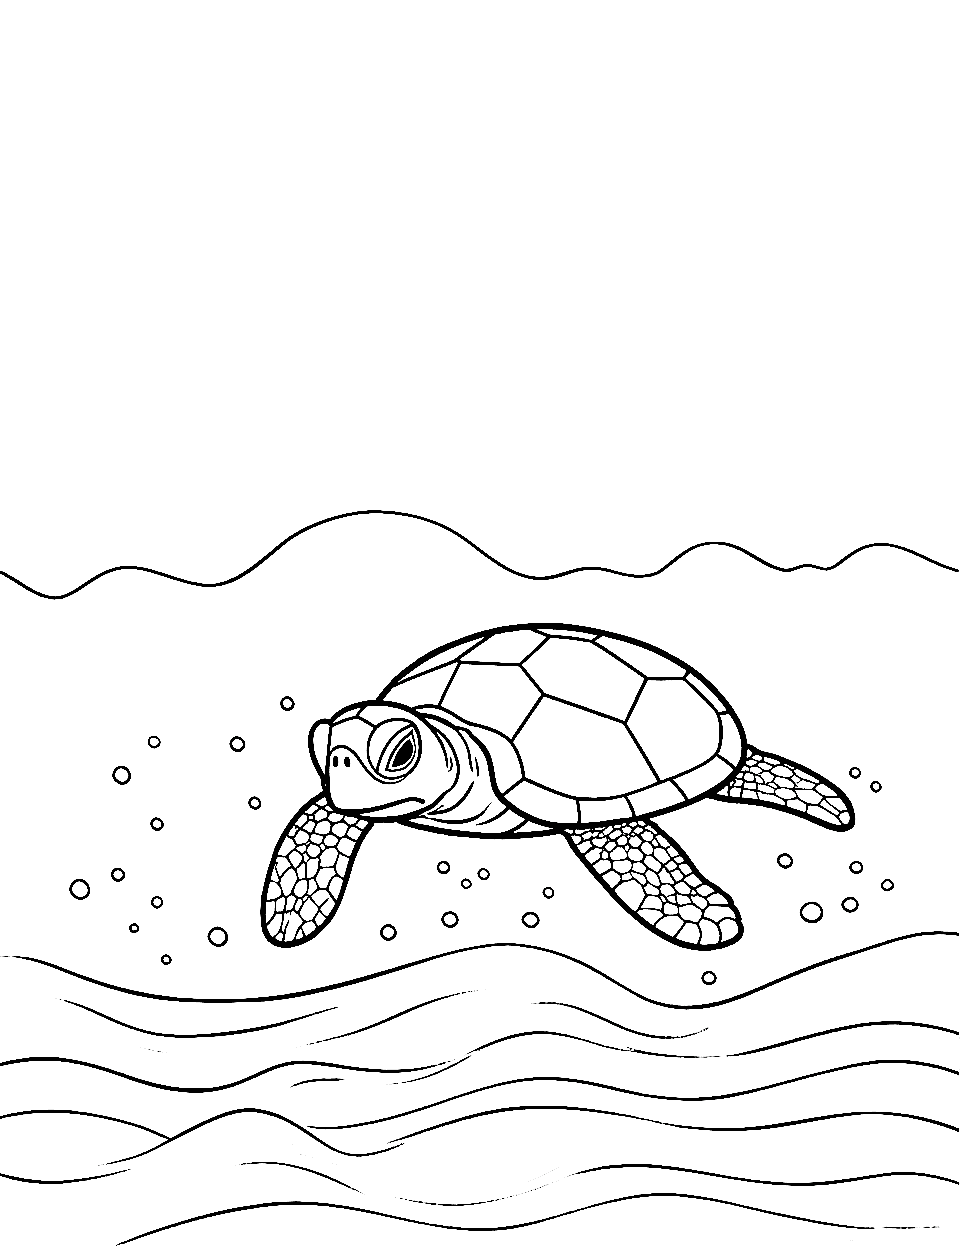 Lake's Peaceful Swimmer Turtle Coloring Page - A turtle smoothly gliding through the calm waters of a lake.